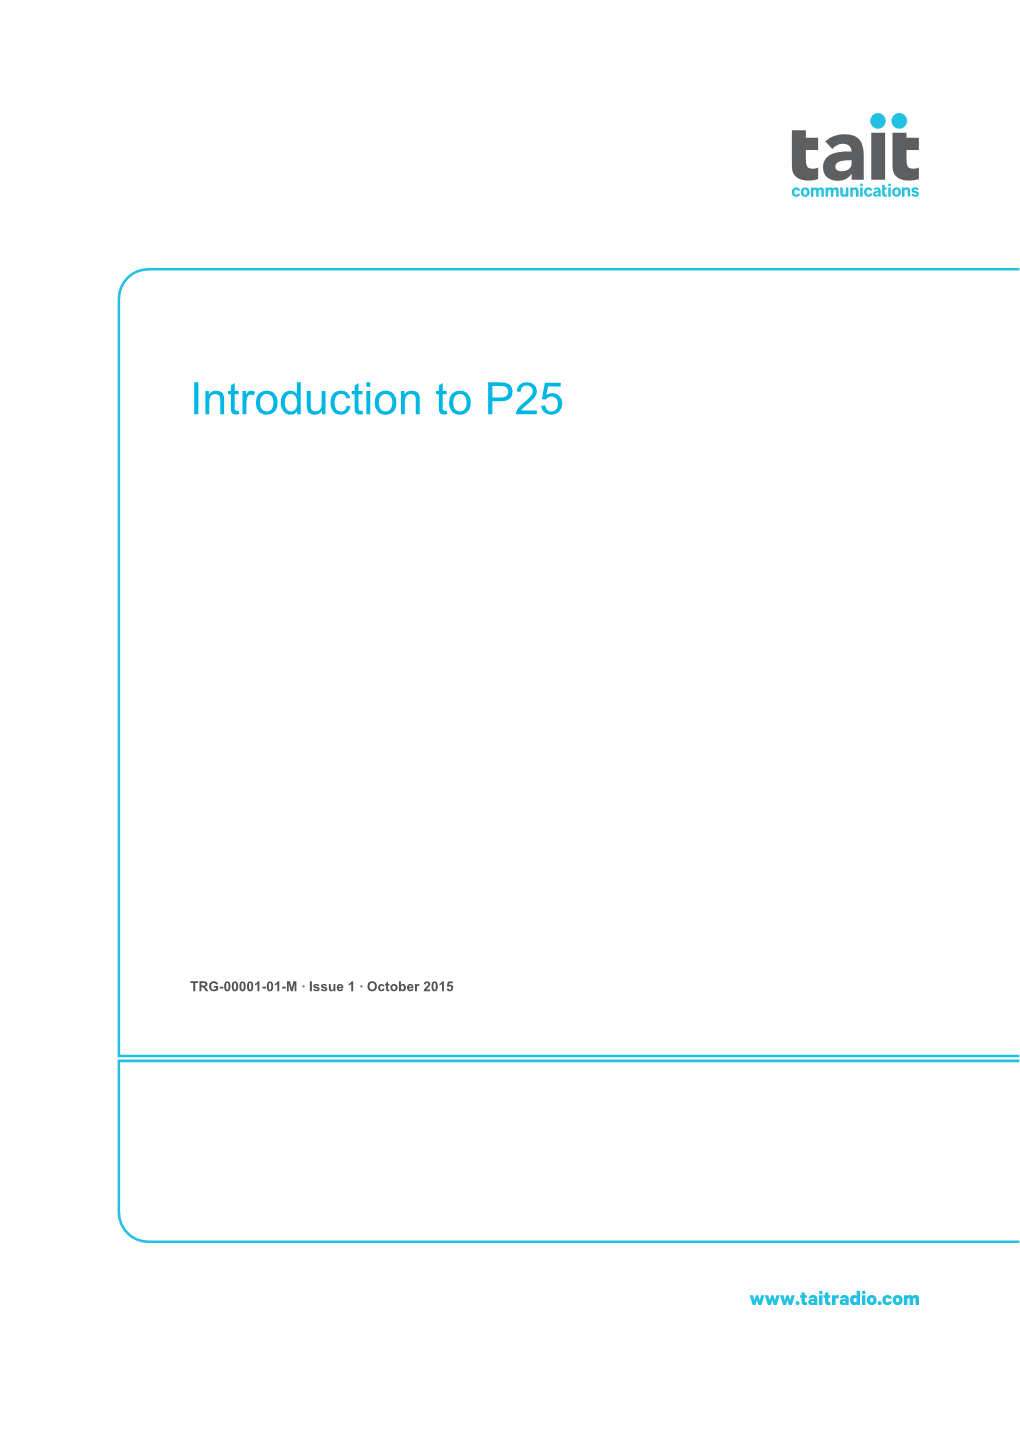 Introduction to P25